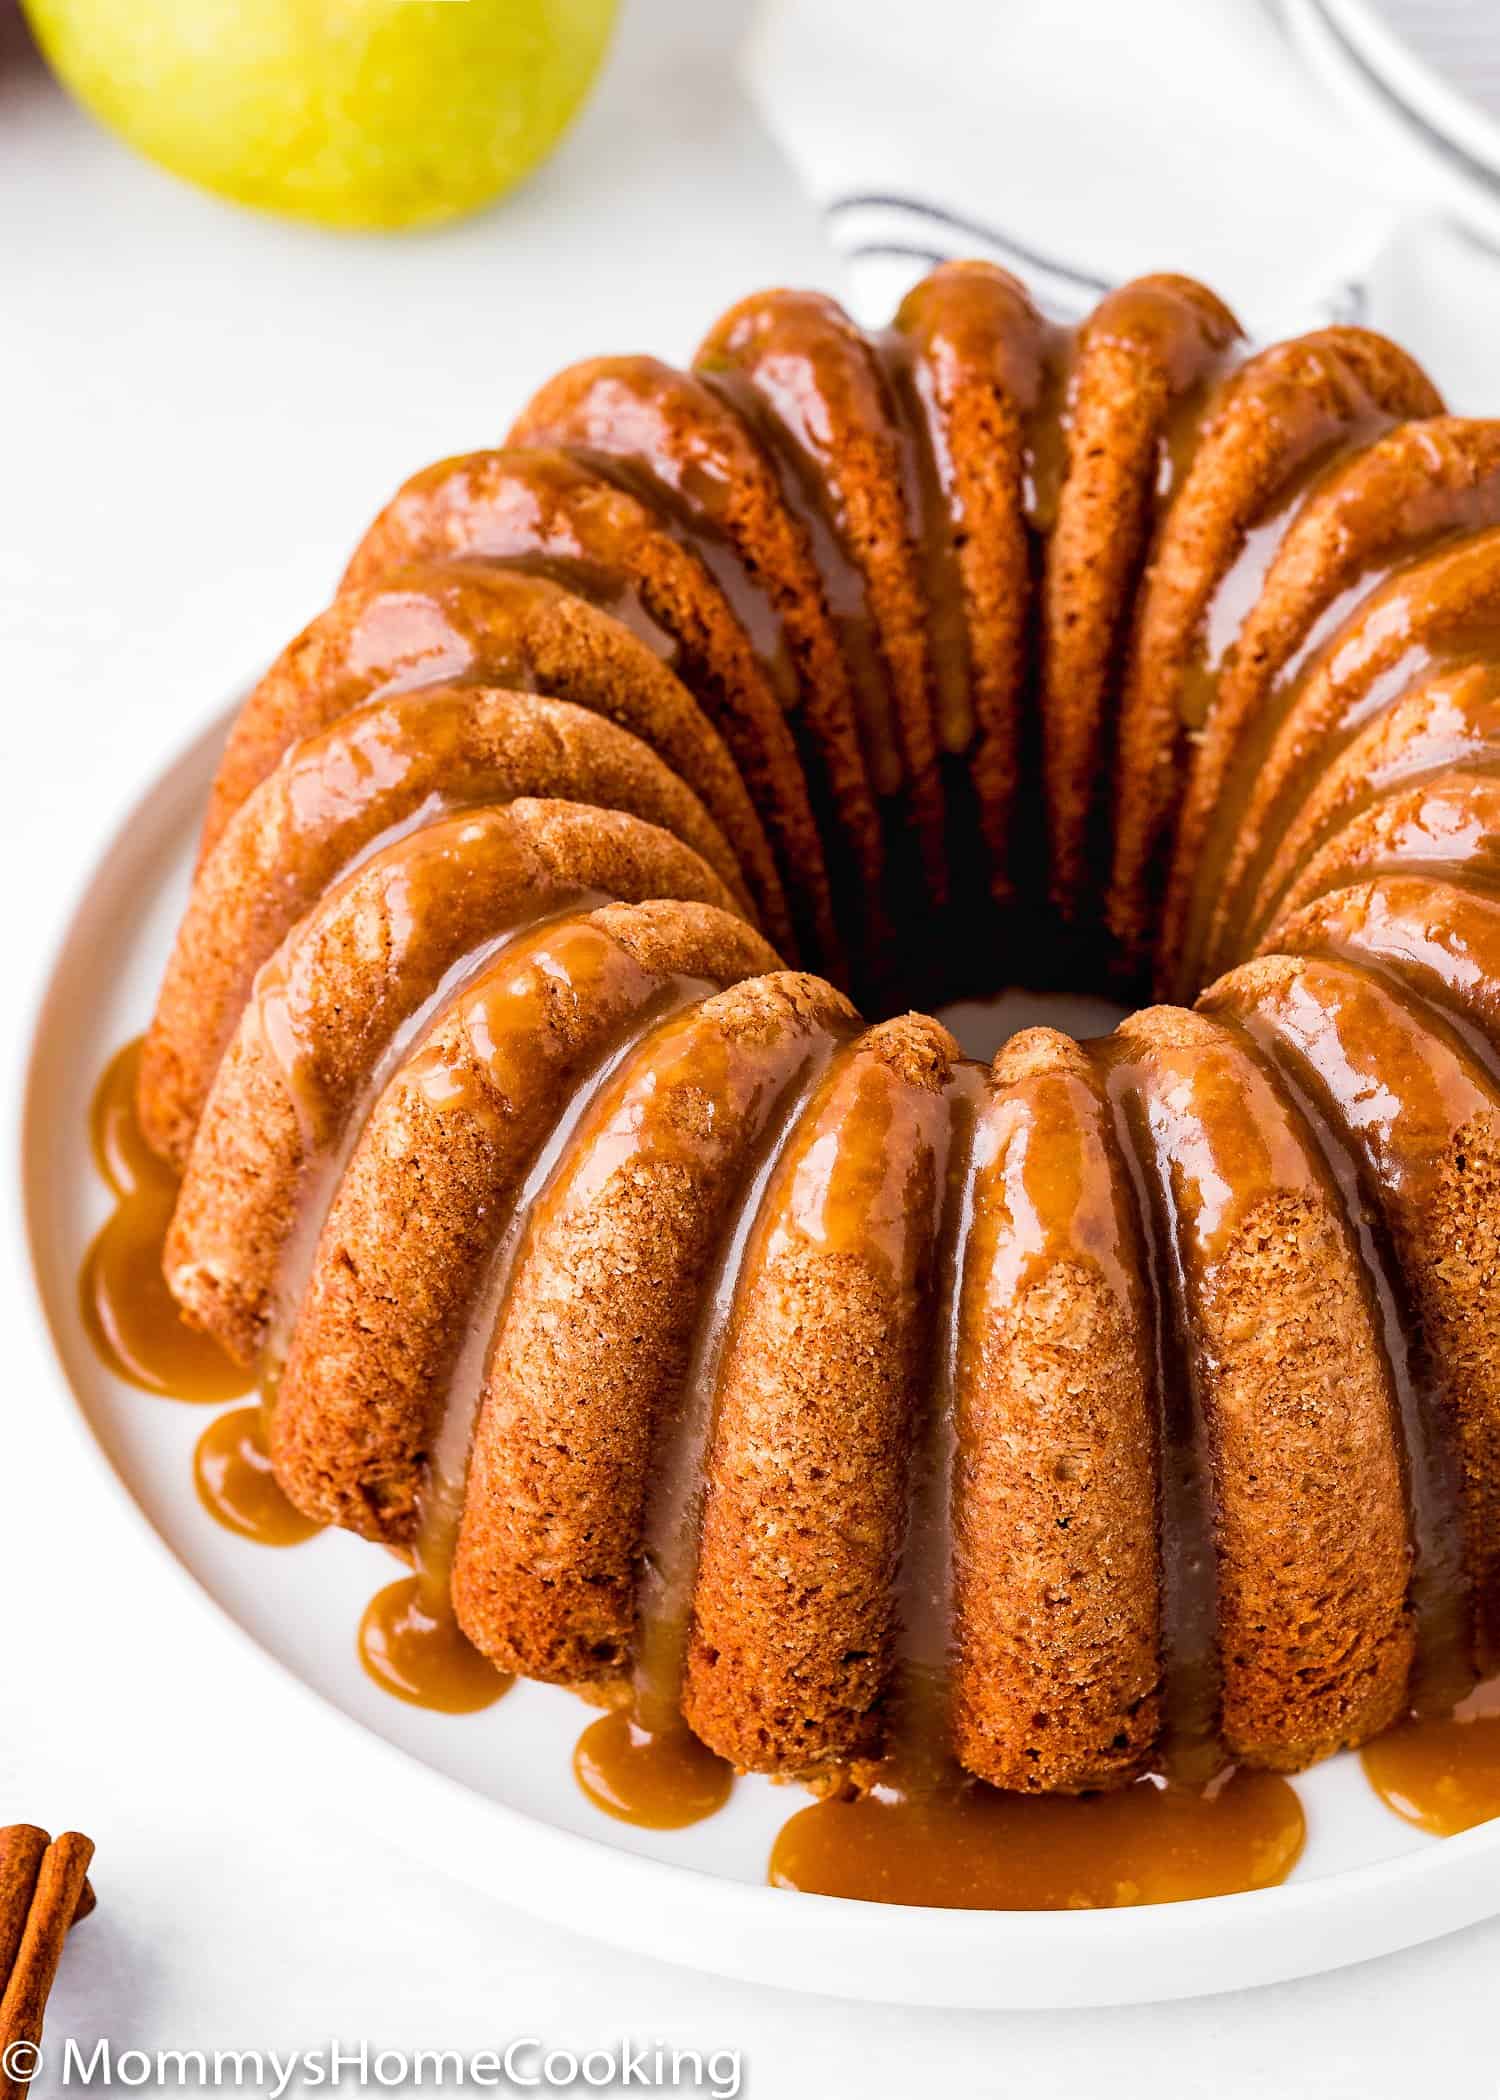 Eggless Apple Cider Donut Cake with brown sugar glaze over a white plate.